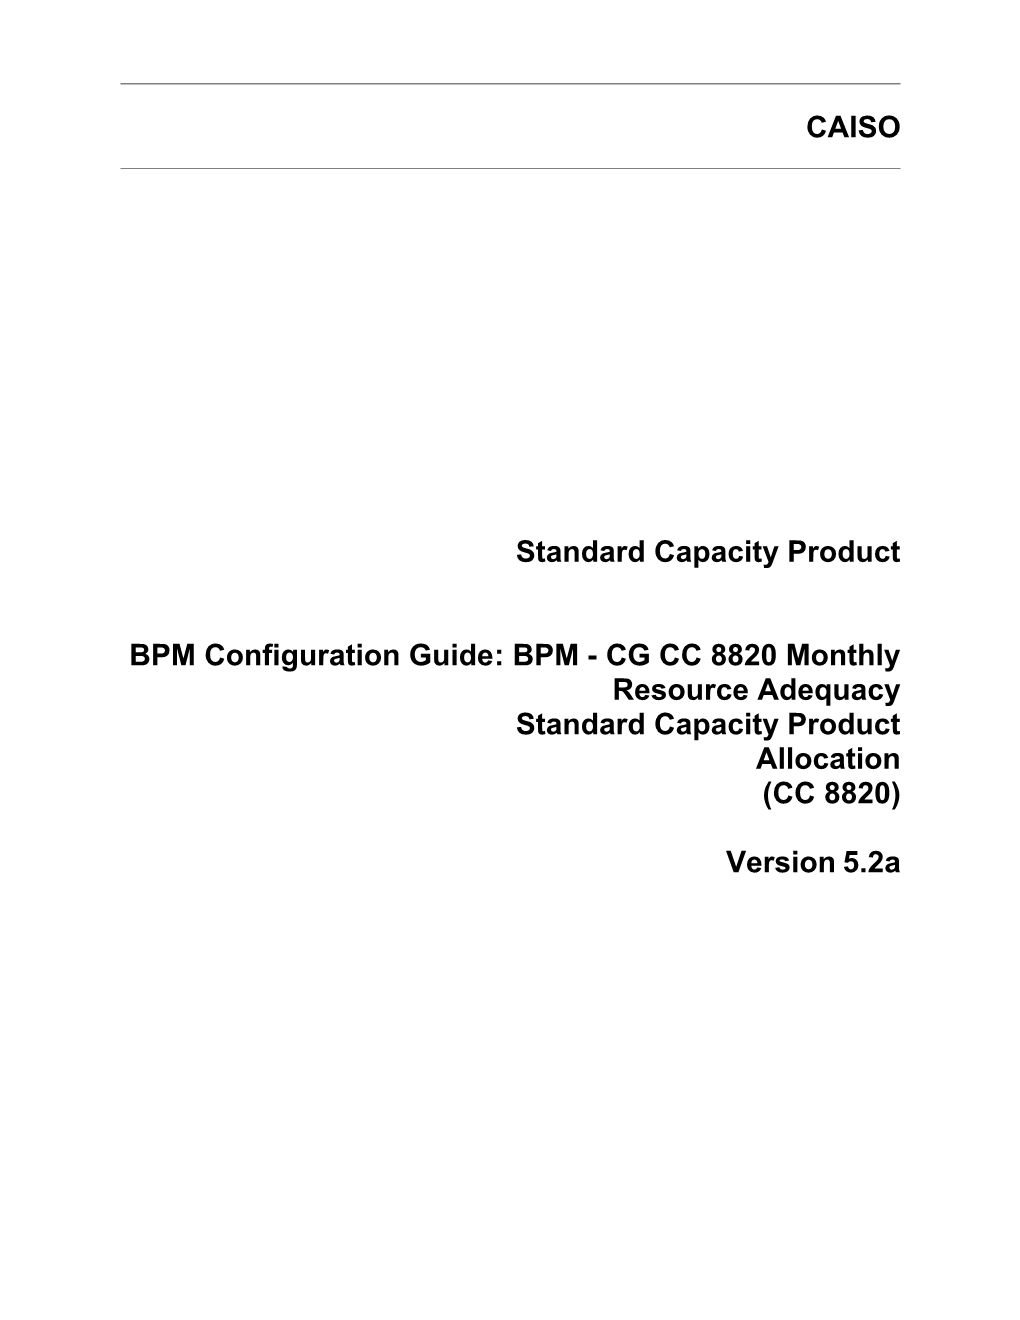 BPM - CG CC 8820 Monthly Resource Adequacy Standard Capacity Product Allocation